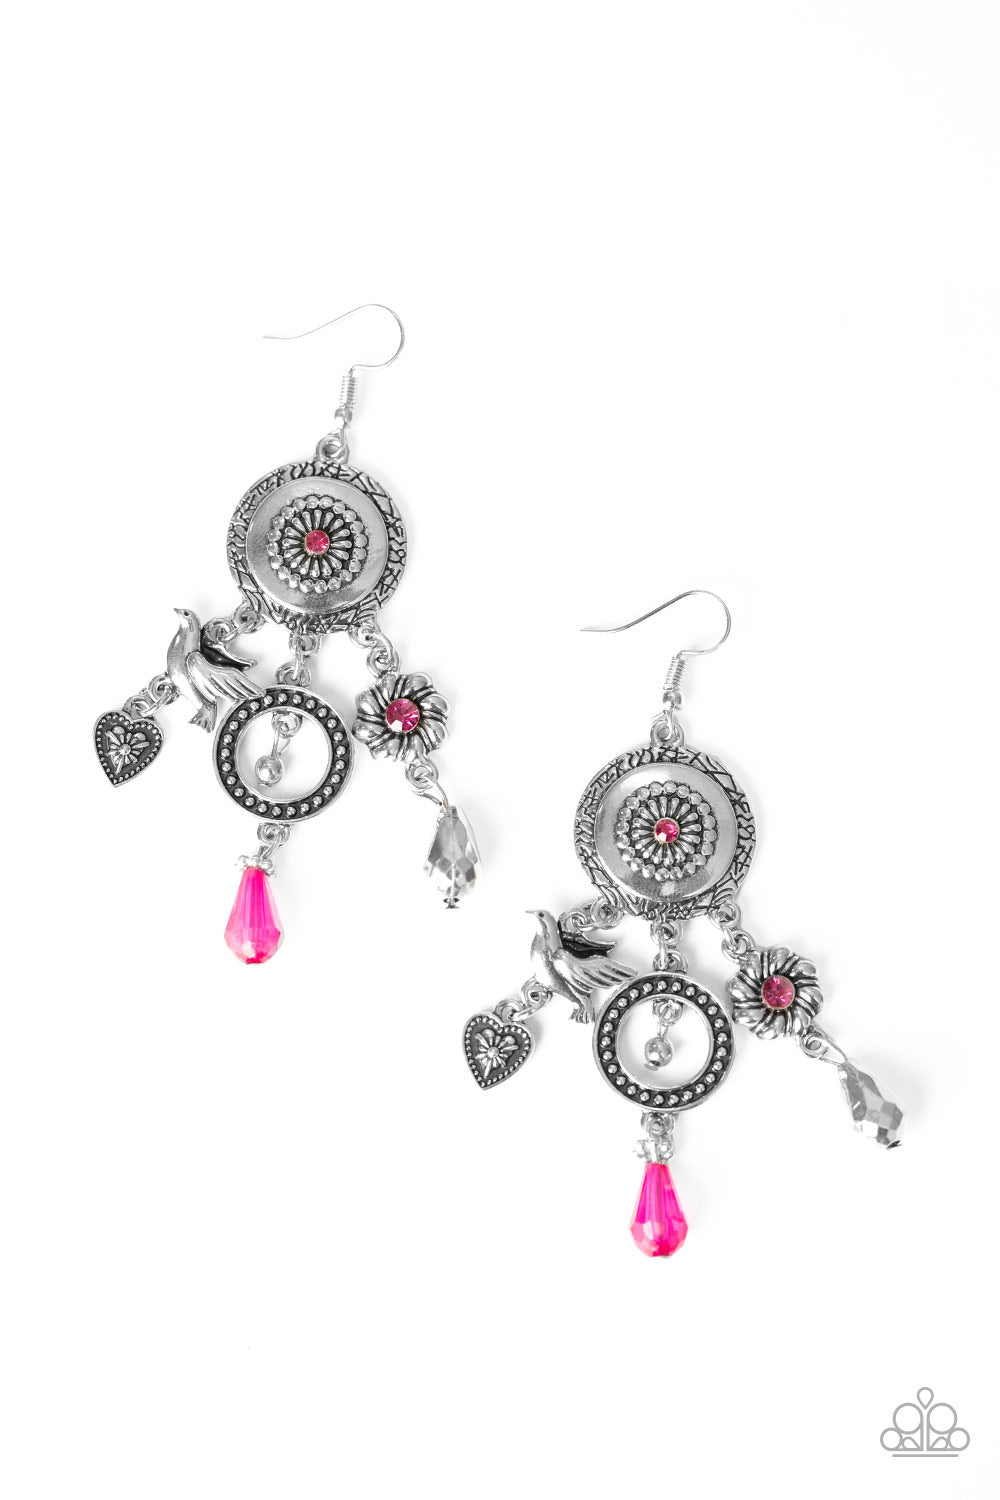 Springtime Essence - Pink and Silver Earrings - Paparazzi Accessories - Infused with glittery Pink Peacock rhinestone and crystal-like accents, a whimsical display of silver heart, flower, and bird charms dance from the bottom of a decorative floral silver frame, creating a noisy fringe. Earring attaches to a standard fishhook fitting.